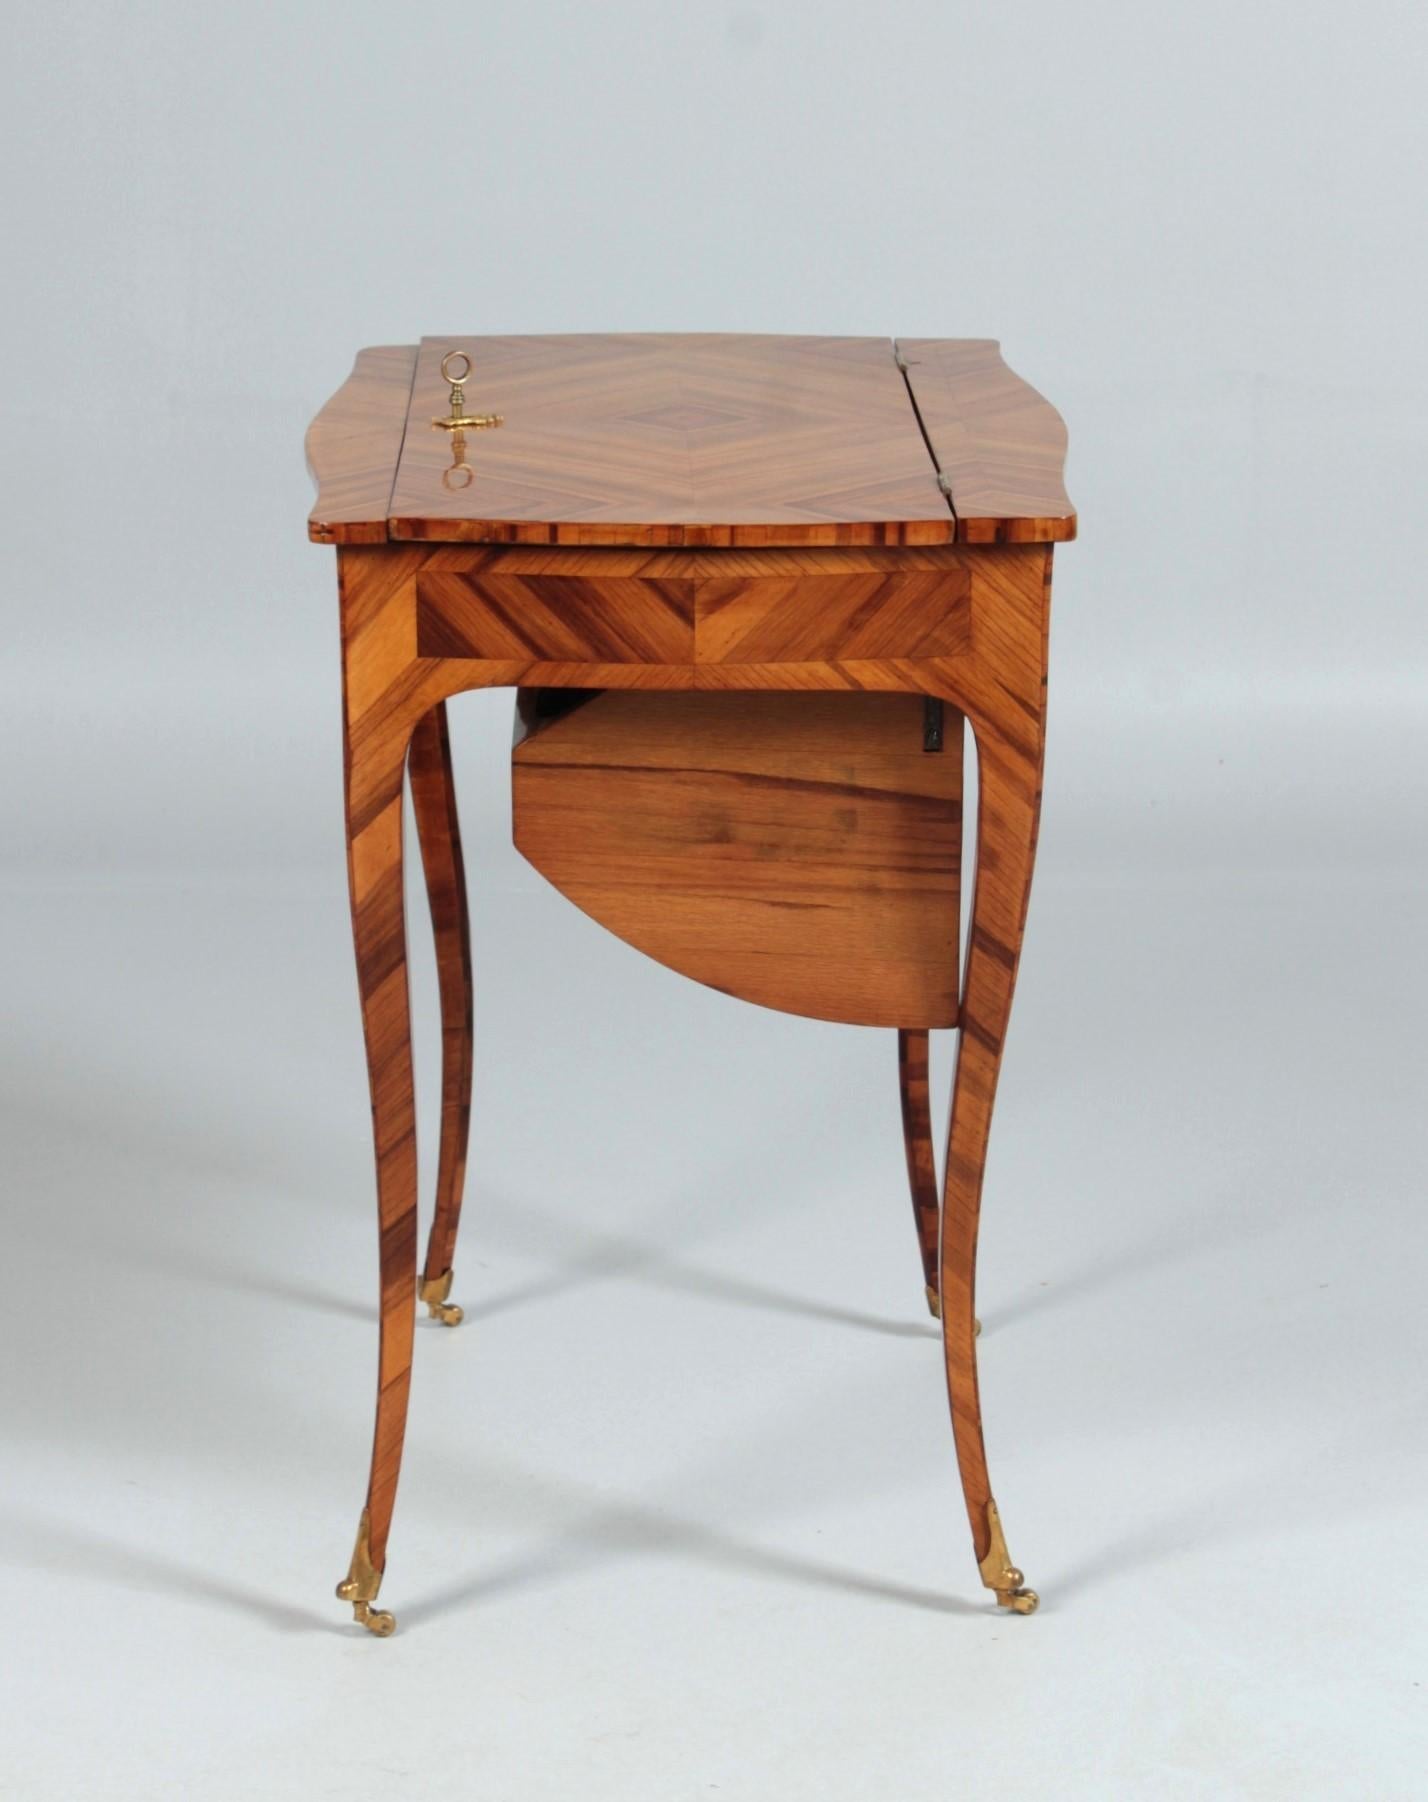 Convertible small desk - so-called Secrétaire à culbute

France
19th c.

Dimensions: H x W x D: 70 x 65 x 47 cm

Description:
Quite rare and unusual Louis XV style transforming furniture.

When closed, we see a side table on curved flared legs in